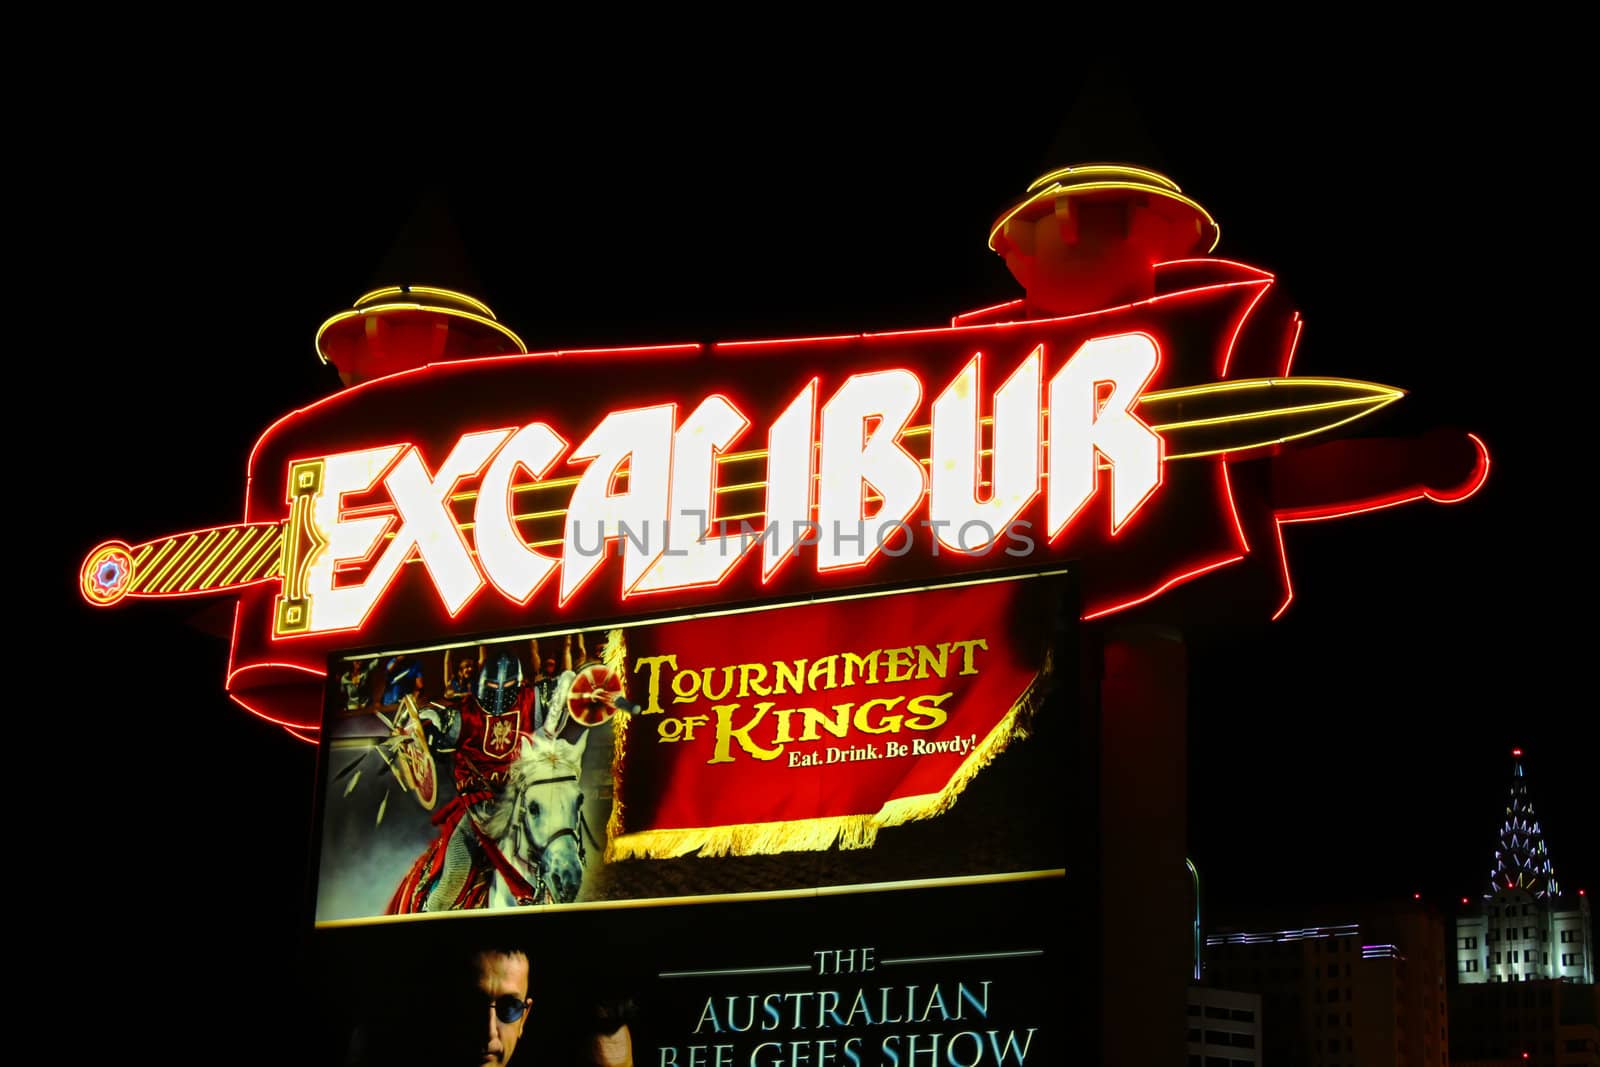 Las Vegas, USA - May 23, 2012: Main street sign of the Excalibur Hotel and Casino on the Las Vegas Strip. The Excalibur was opened in the year 1990.